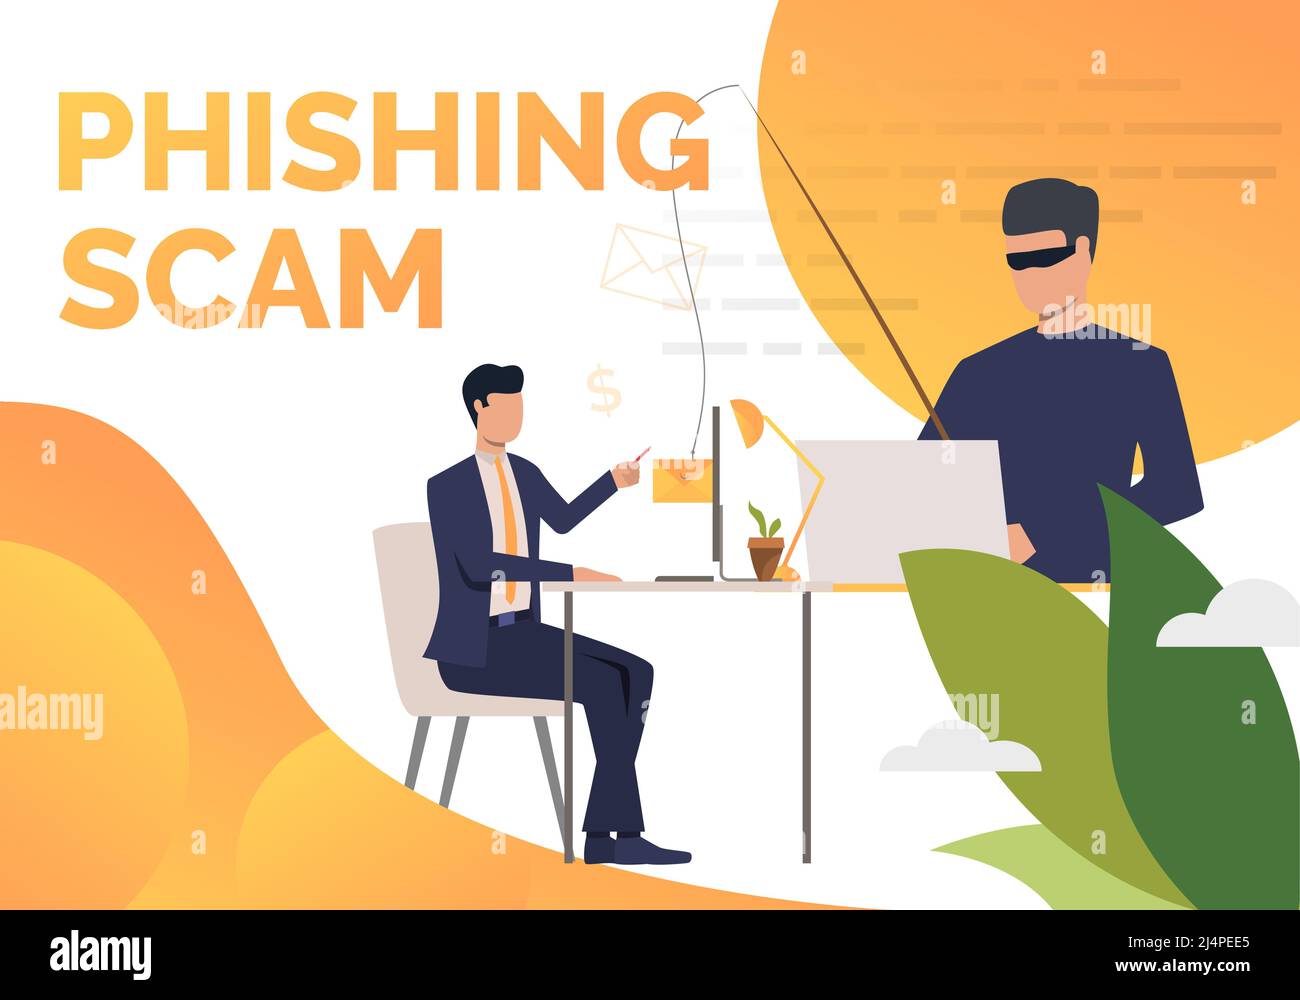 Phishing scam poster template. Scammer hacking into corporate email server. Hacker attack concept. Vector illustration can be used for banners, presen Stock Vector